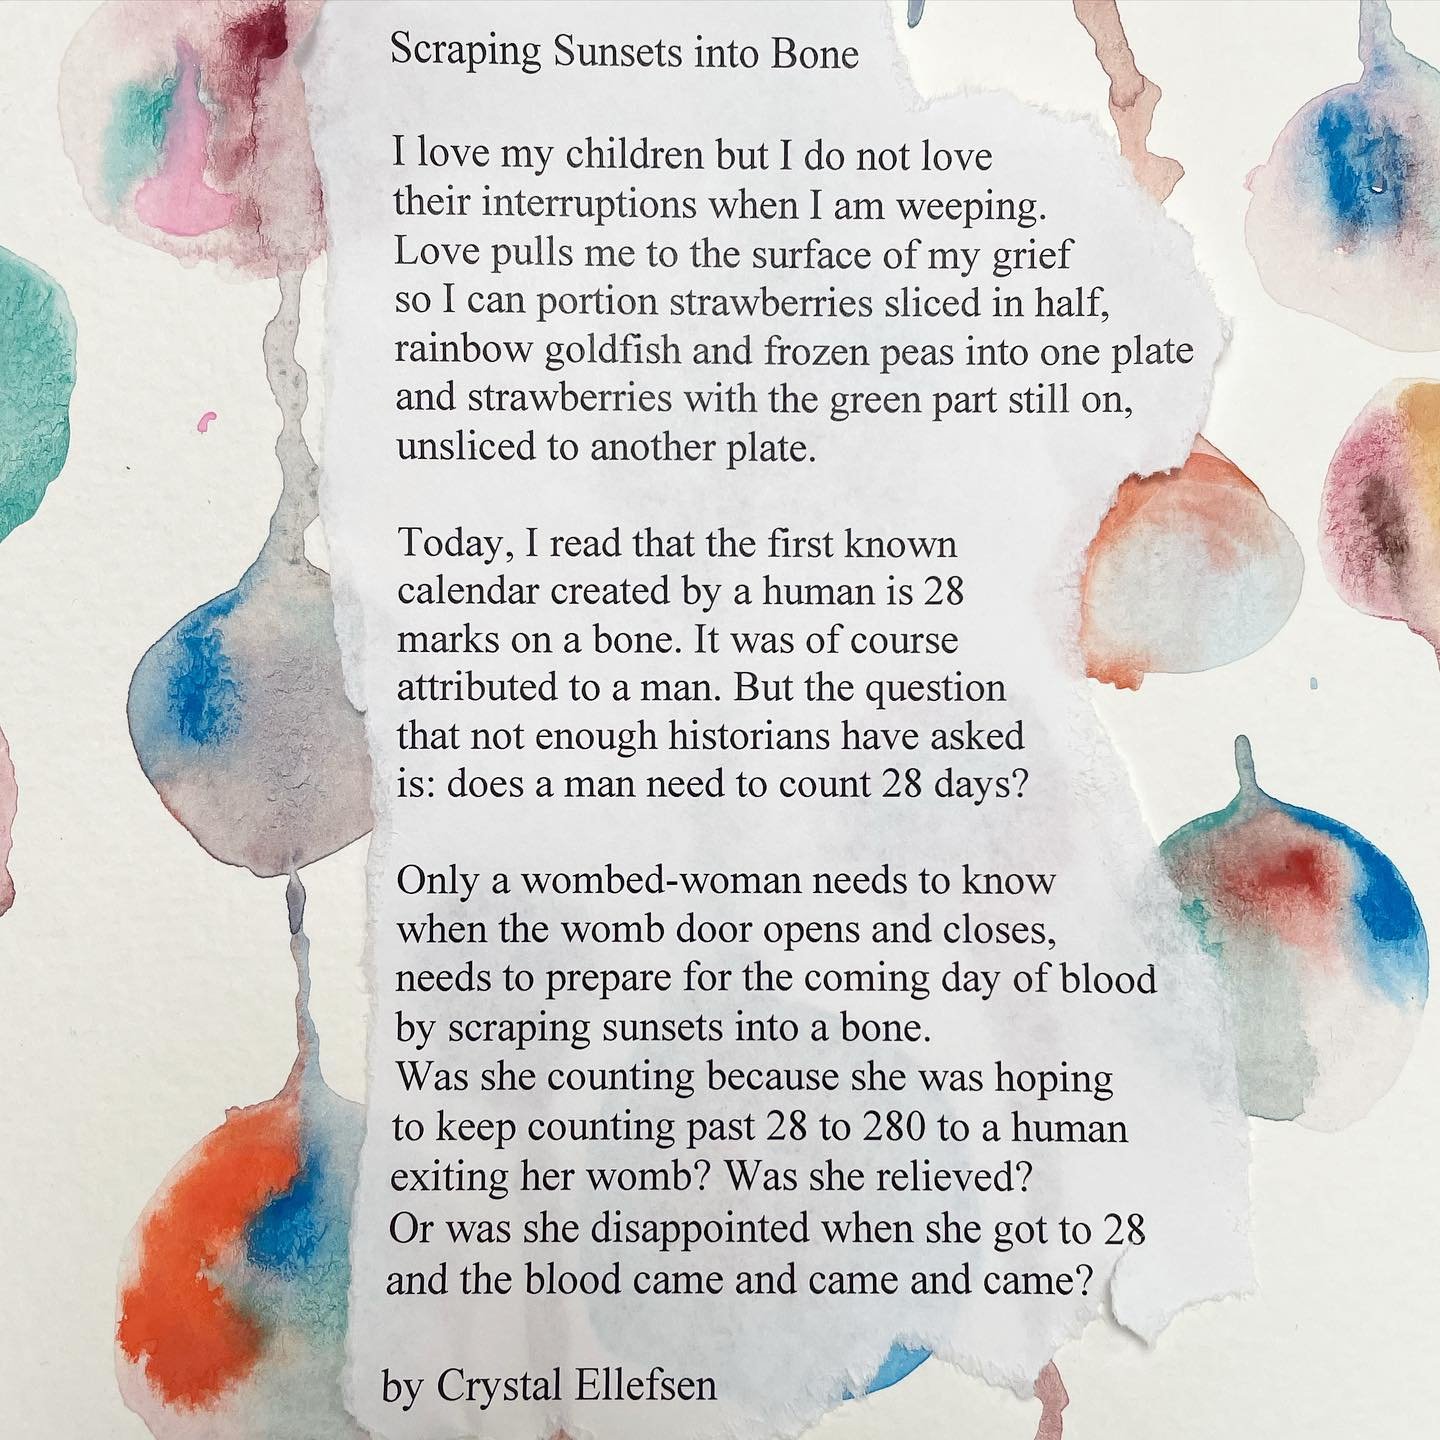 Today I read something @katejbaer shared in her stories and could not stop thinking about it, then those thoughts turned into a poem. 

&mdash;&mdash;&mdash;&mdash;

Scraping Sunsets into Bone

I love my children but I do not love
their interruptions